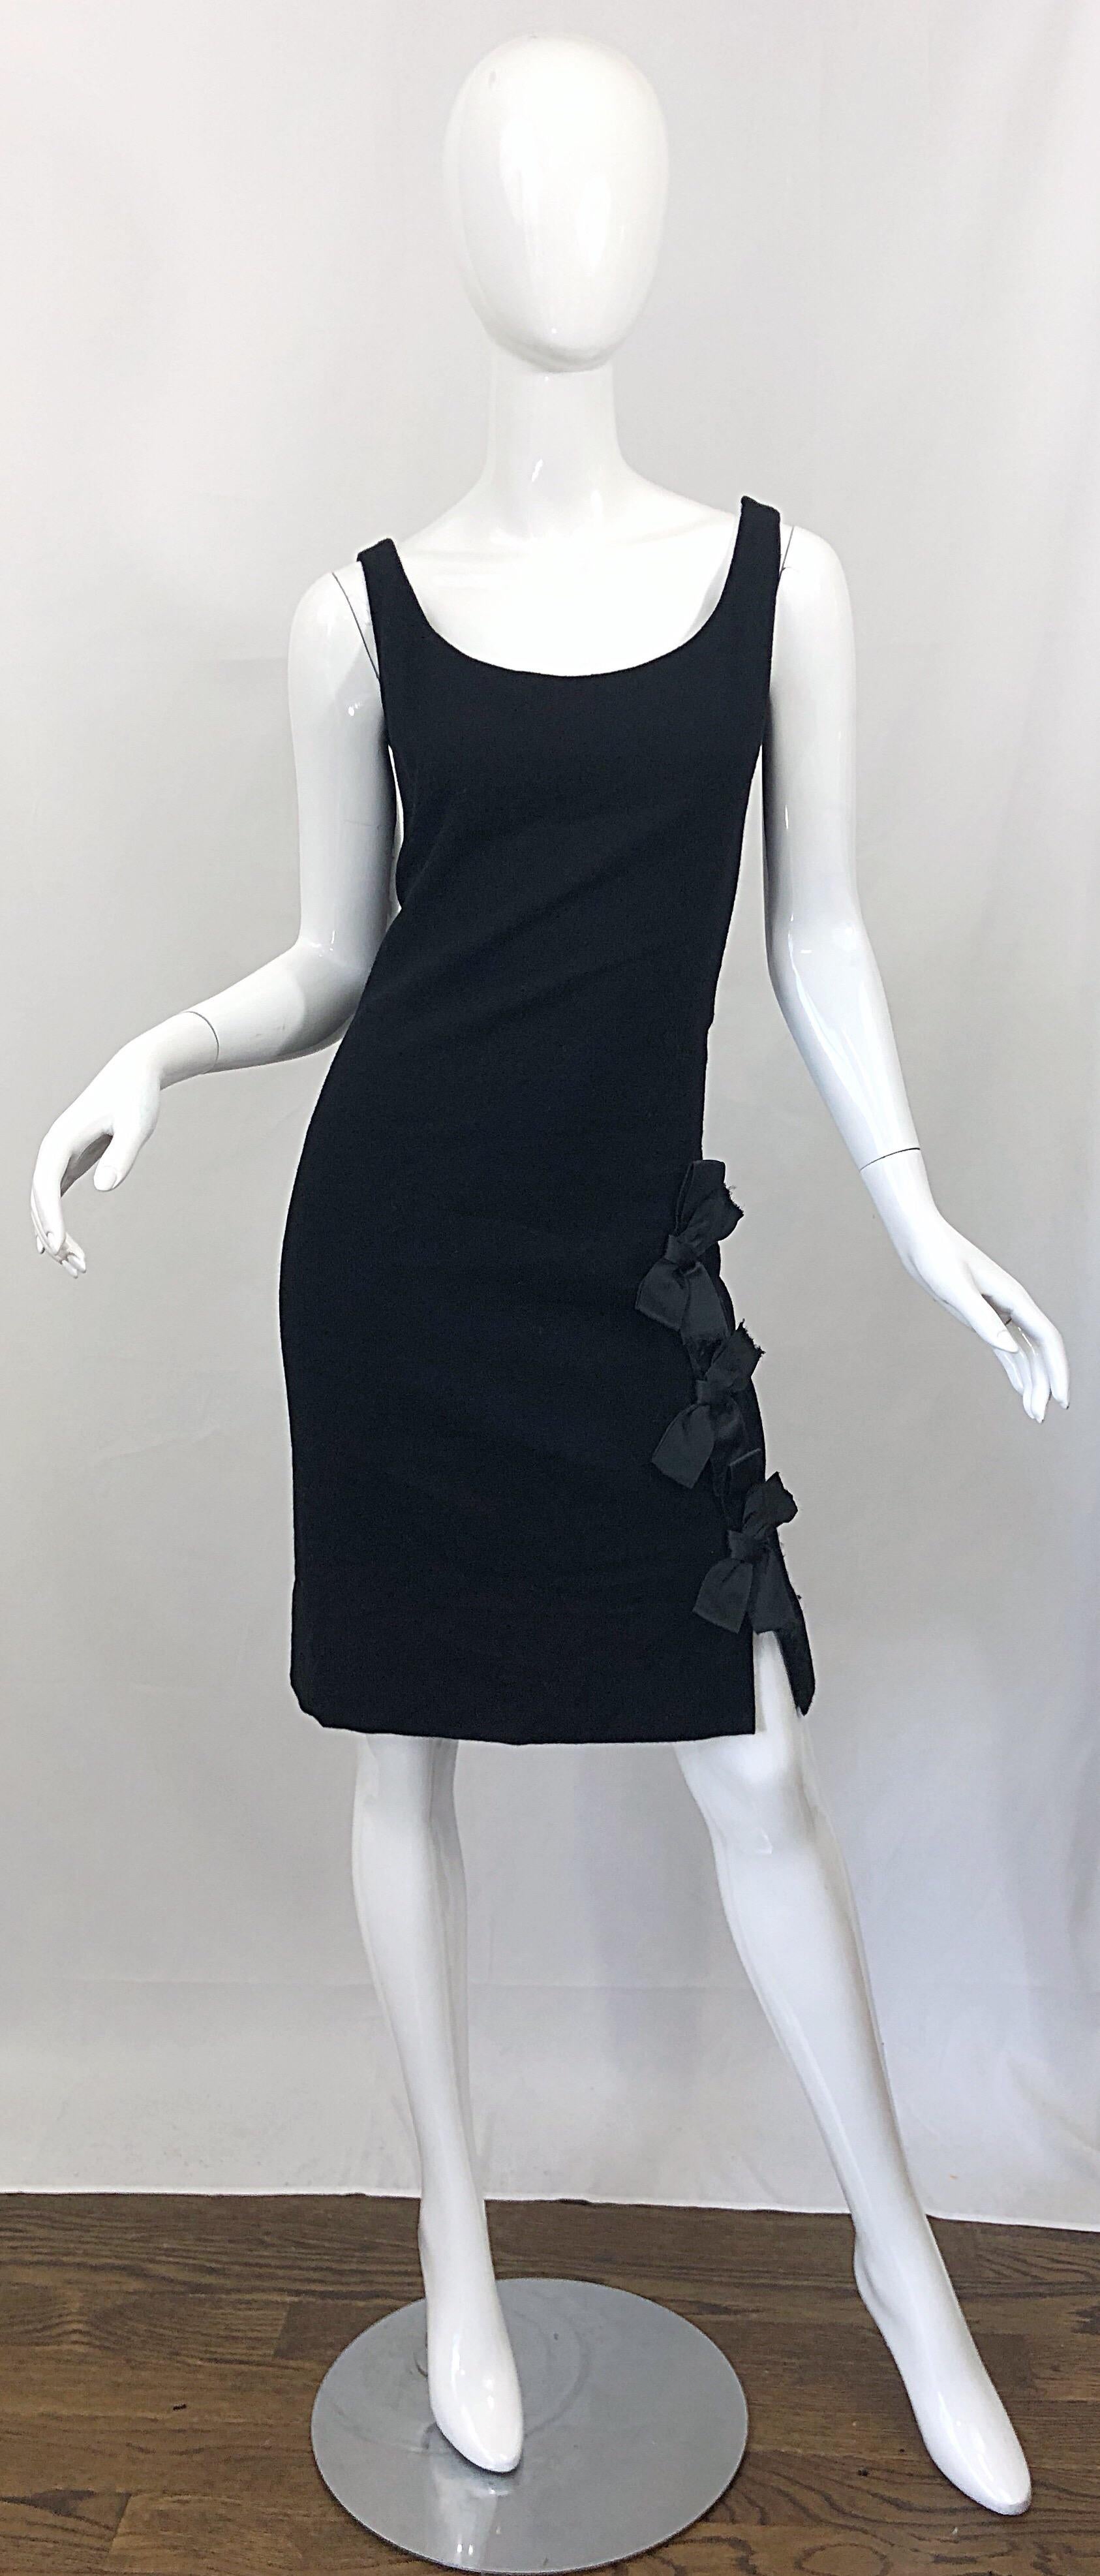 Timeless stylish 1960s GEOFFREY BEENE 60s vintage black wool bow detail sheath dress! Flattering sheath silhouette that looks great on any shape. Three black silk bows up the left hem. Hidden metal zipper up the side with hook-and-eye closure. Fully